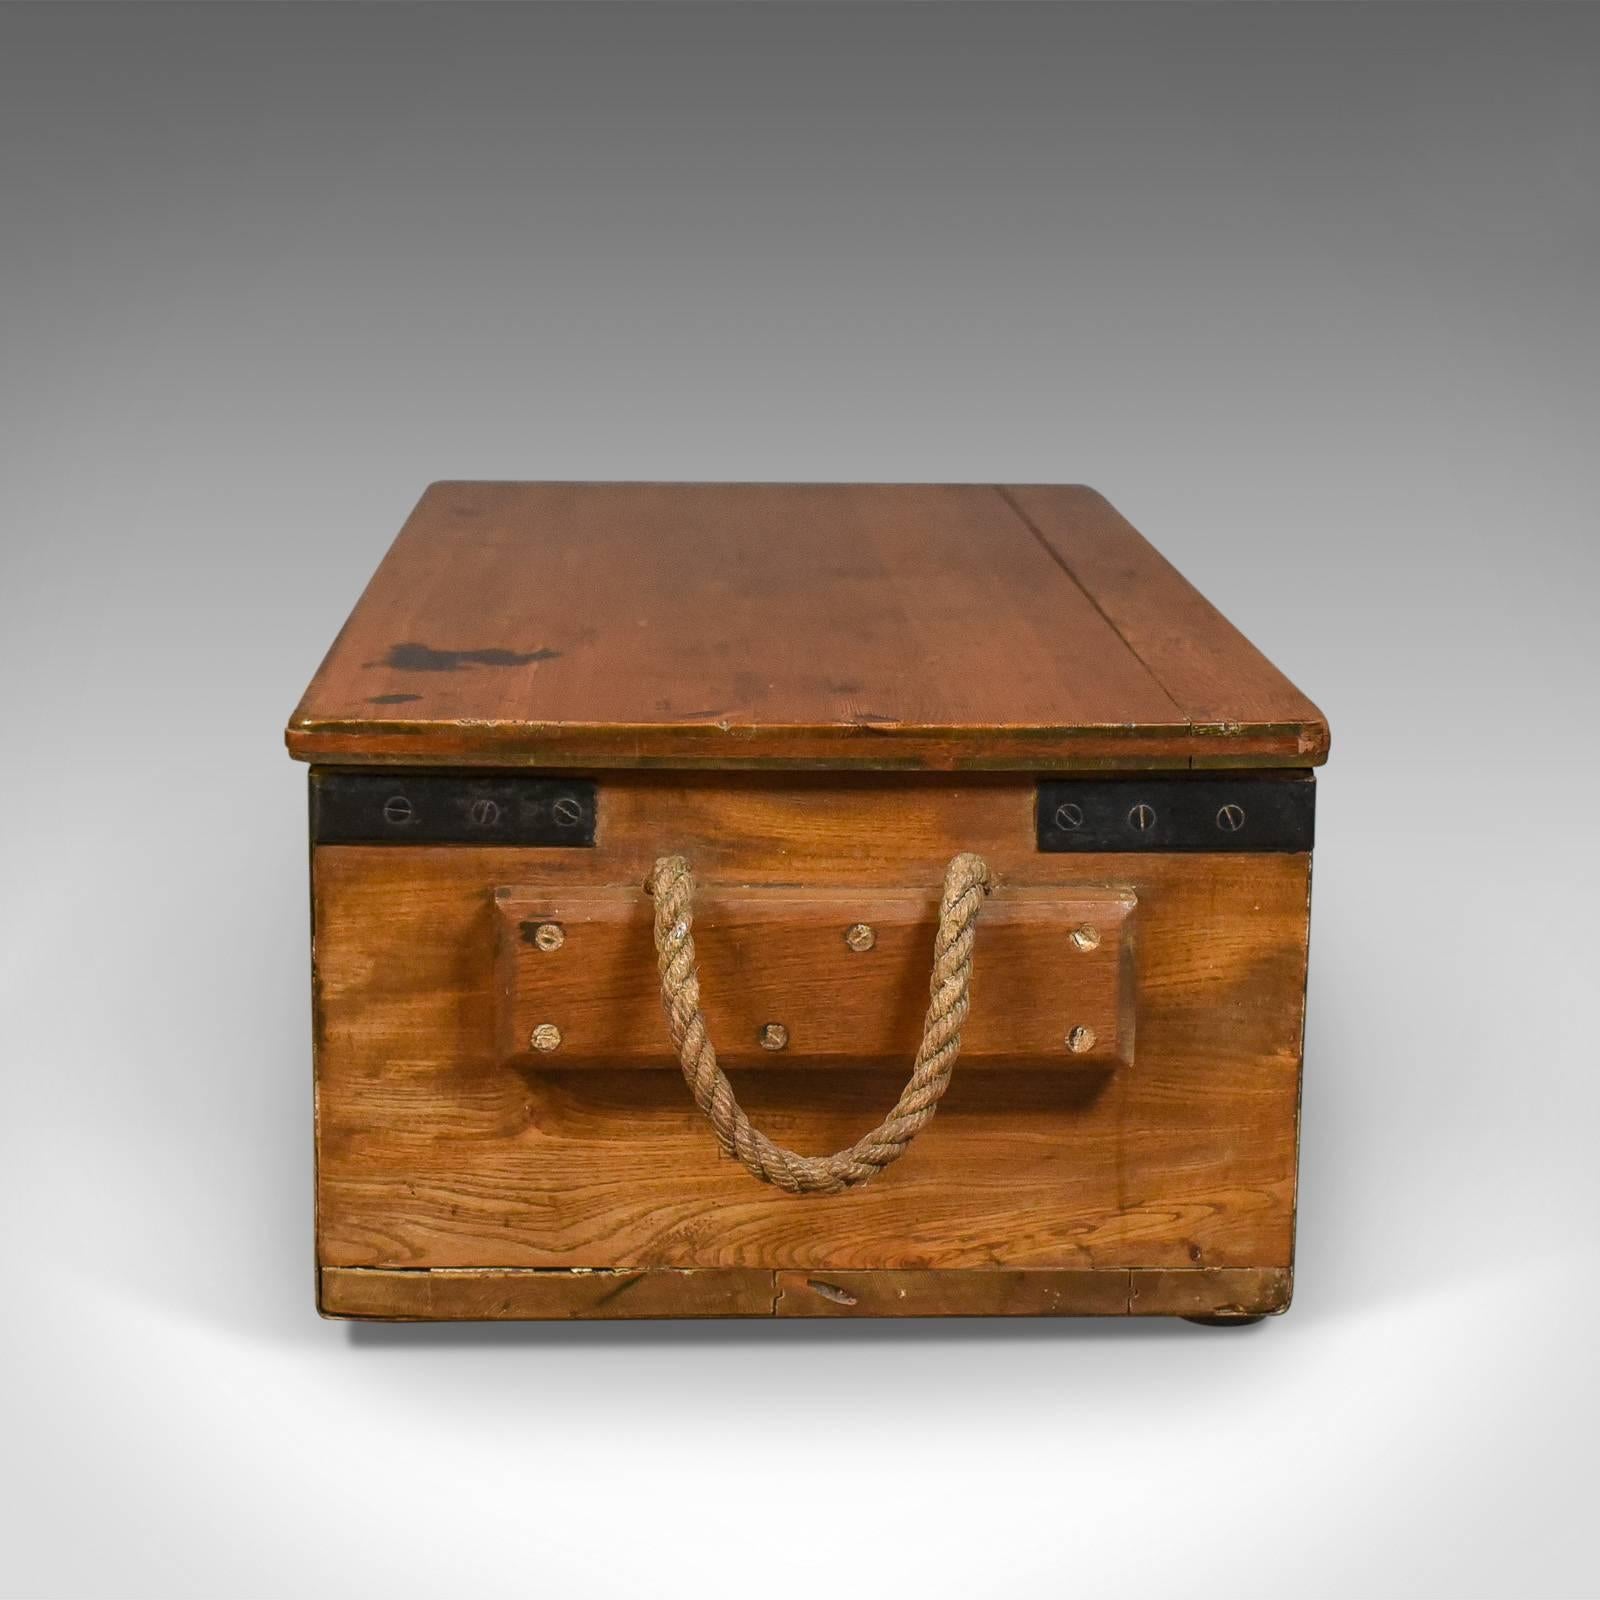 Victorian Antique Boat Builders Chest, English, Pitch Pine and Teak Trunk, circa 1900